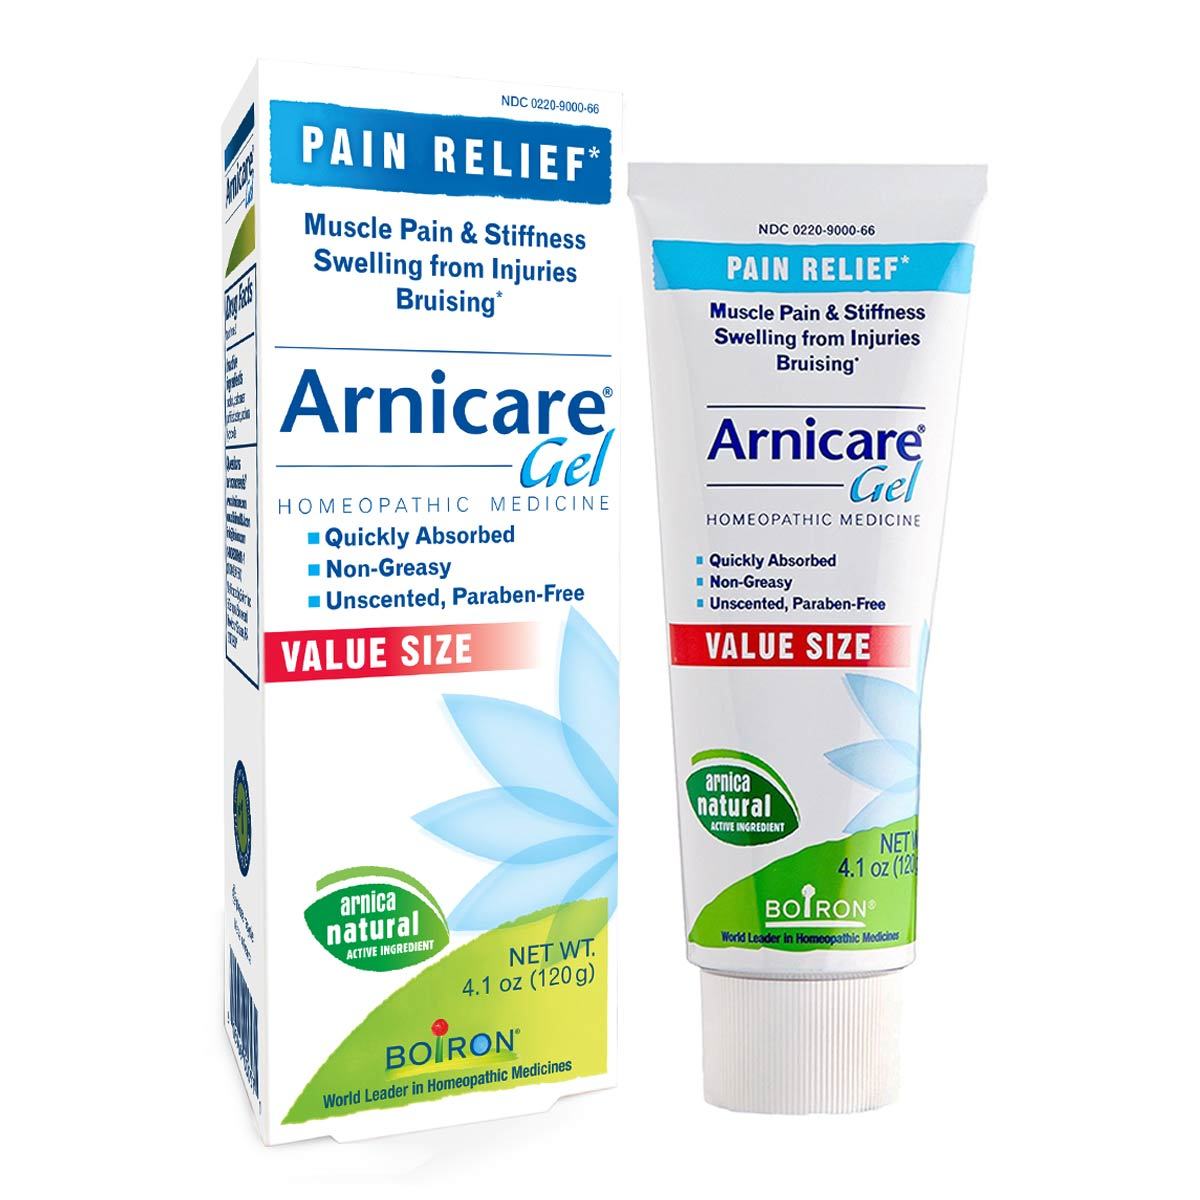 Arnica Gel: Does It Actually Reduce Pain?